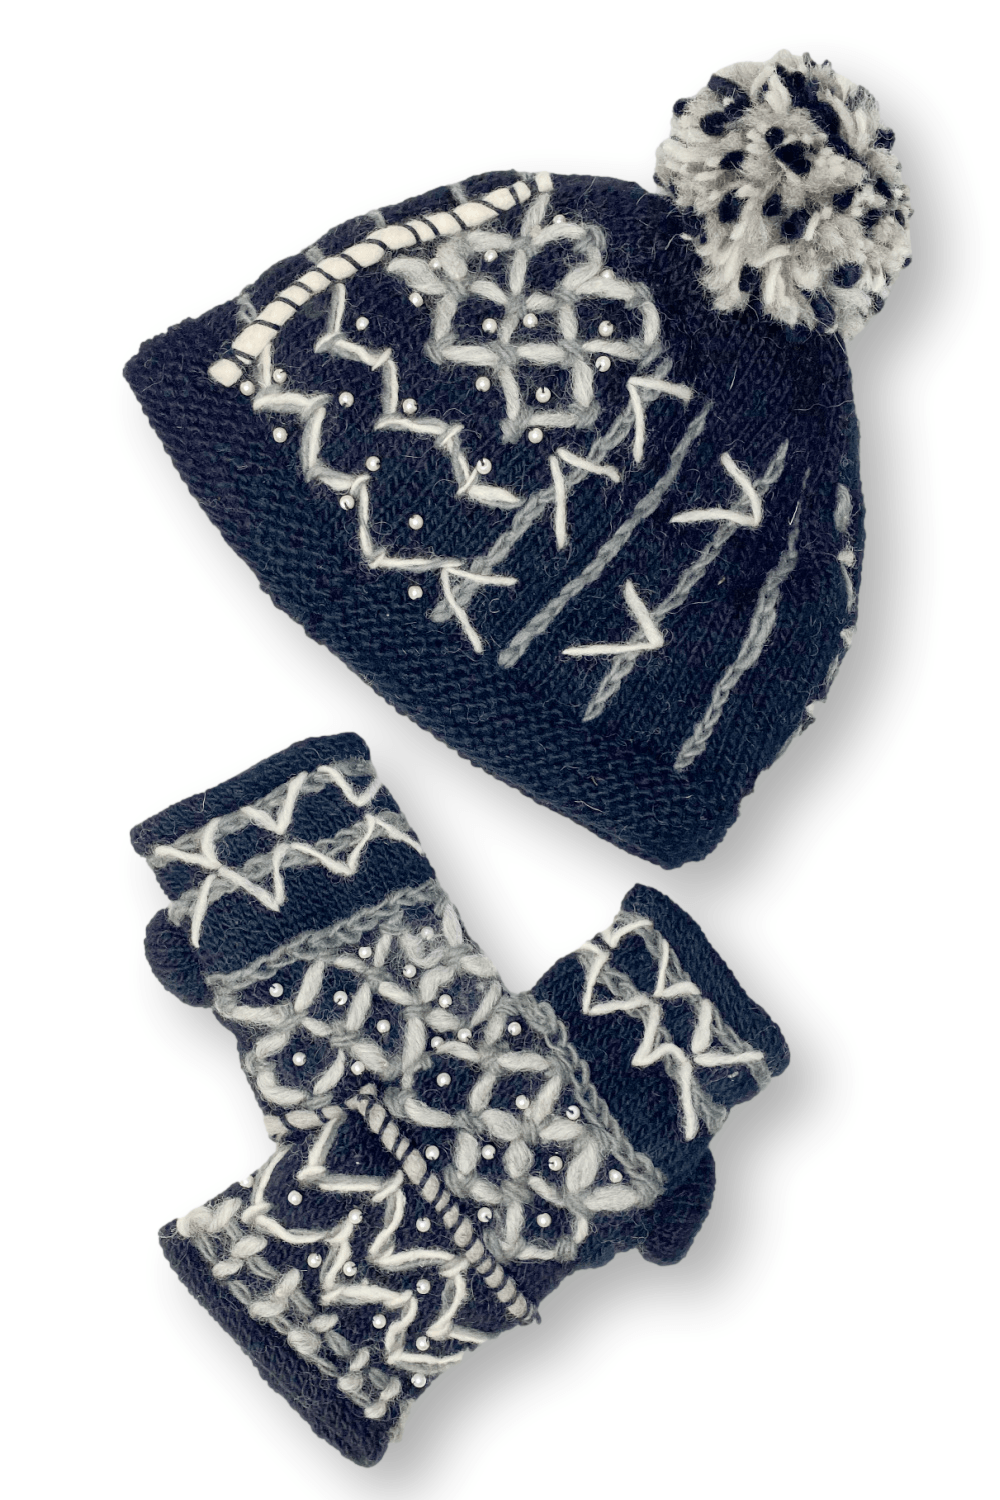 Woman's wool beanie with fleece lining decorated with with stiching and a black and white pom pom. Show with matching fingerless gloves.